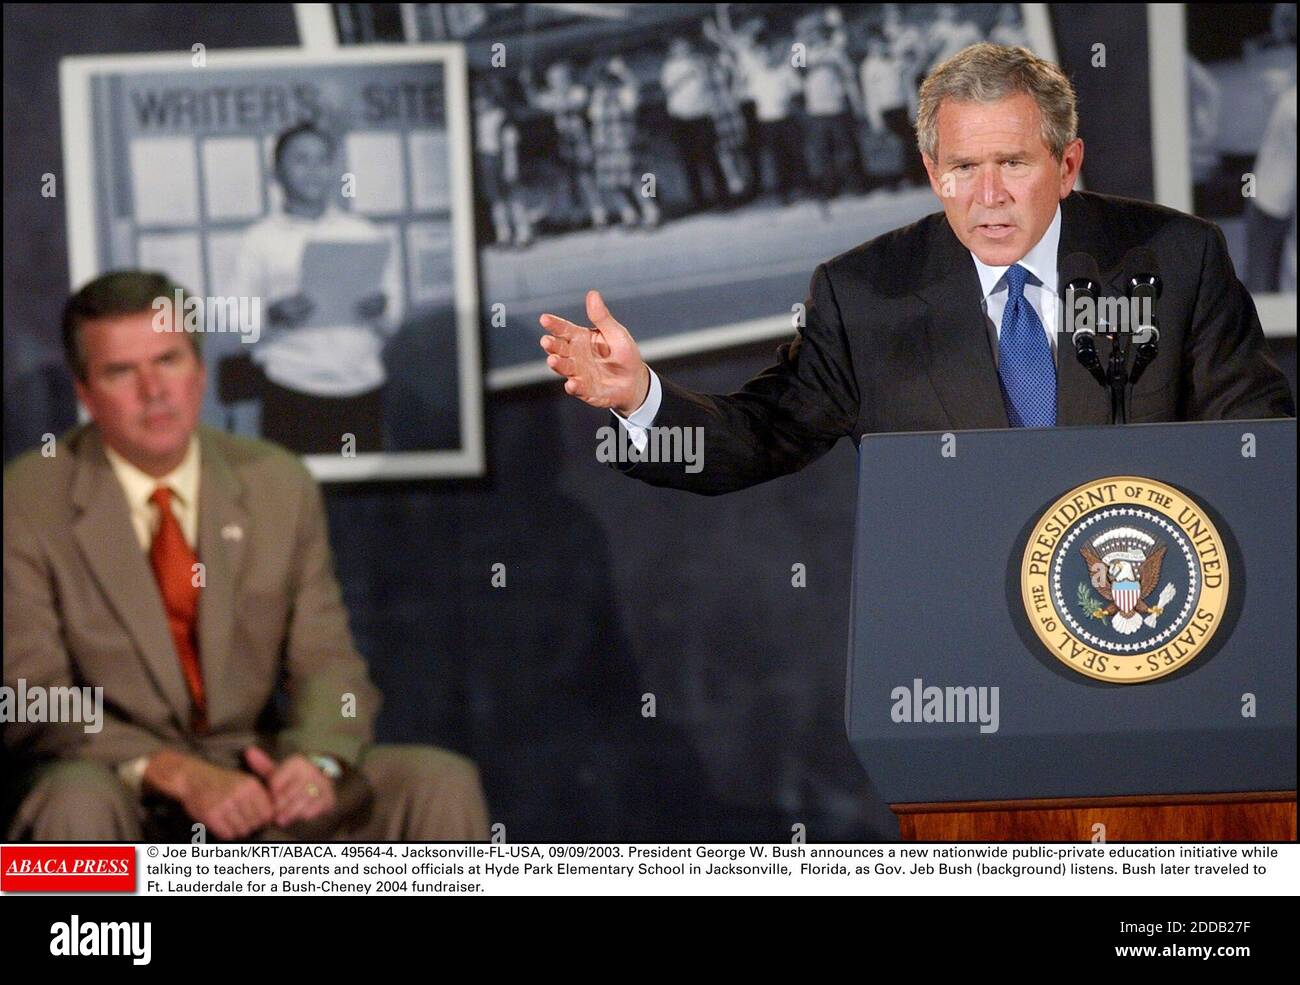 NO FILM, NO VIDEO, NO TV, NO DOCUMENTARY - File photo : © Joe Burbank/KRT/ABACA. 49564-4. Jacksonville-FL-USA, 09/09/2003. President George W. Bush announces a new nationwide public-private education initiative while talking to teachers, parents and school officials at Hyde Park Elementary School in Jacksonvil Appearing before a raucous rally in front of thousands of supporters here Monday afternoon, former Florida governor Jeb Bush showed he is a force to be reckoned with in the presidential election as he officially launched his campaign. Stock Photo